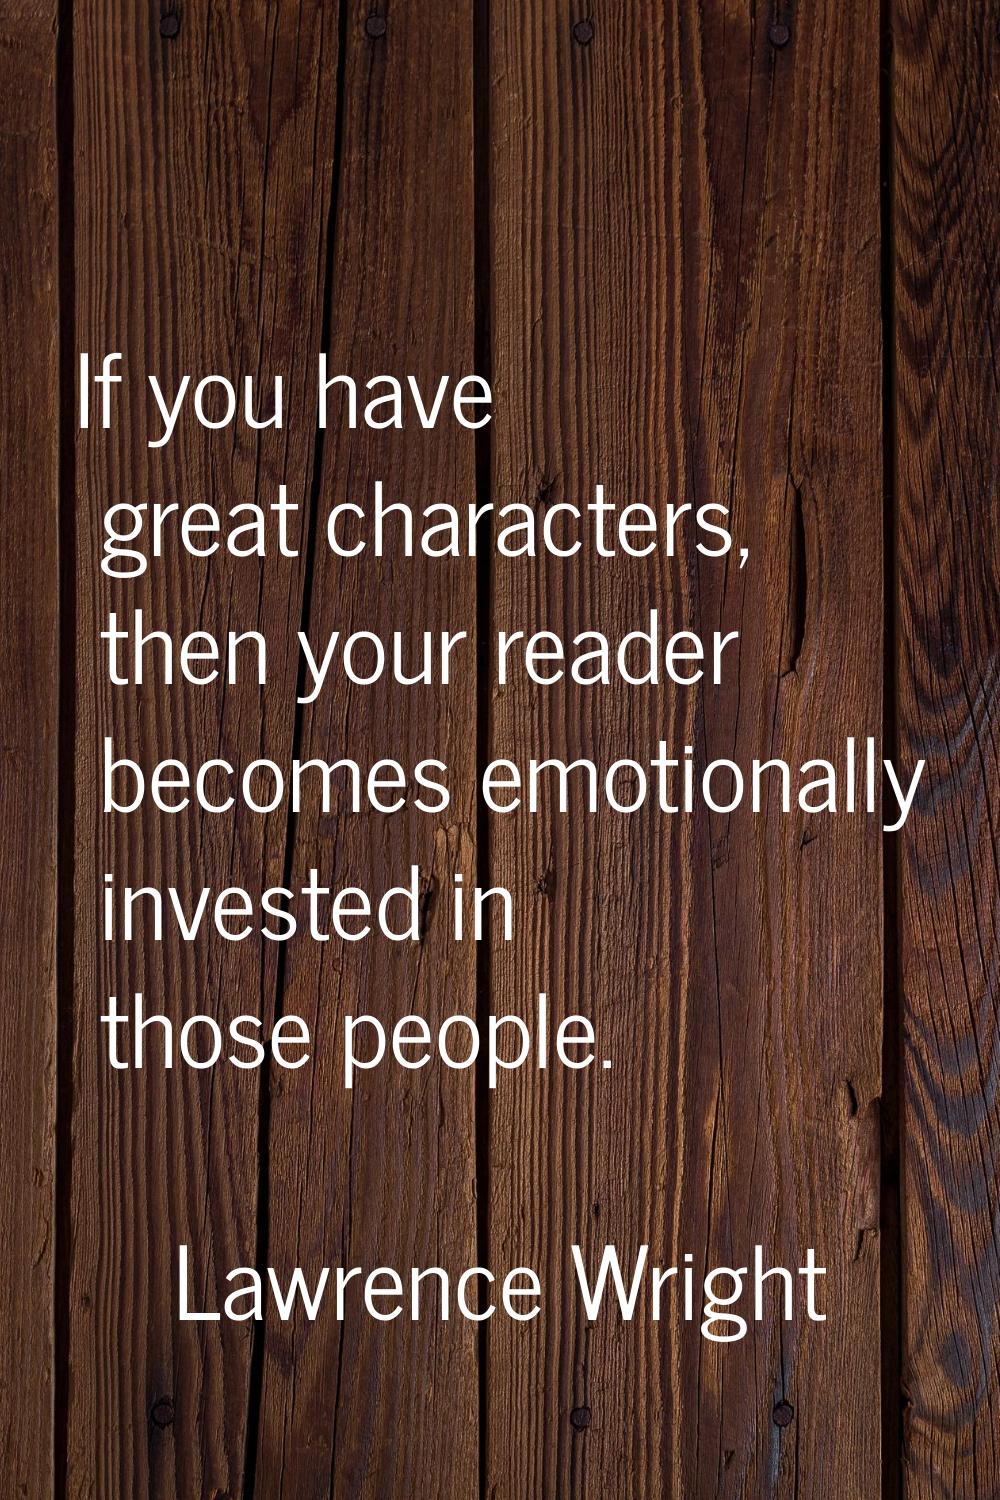 If you have great characters, then your reader becomes emotionally invested in those people.